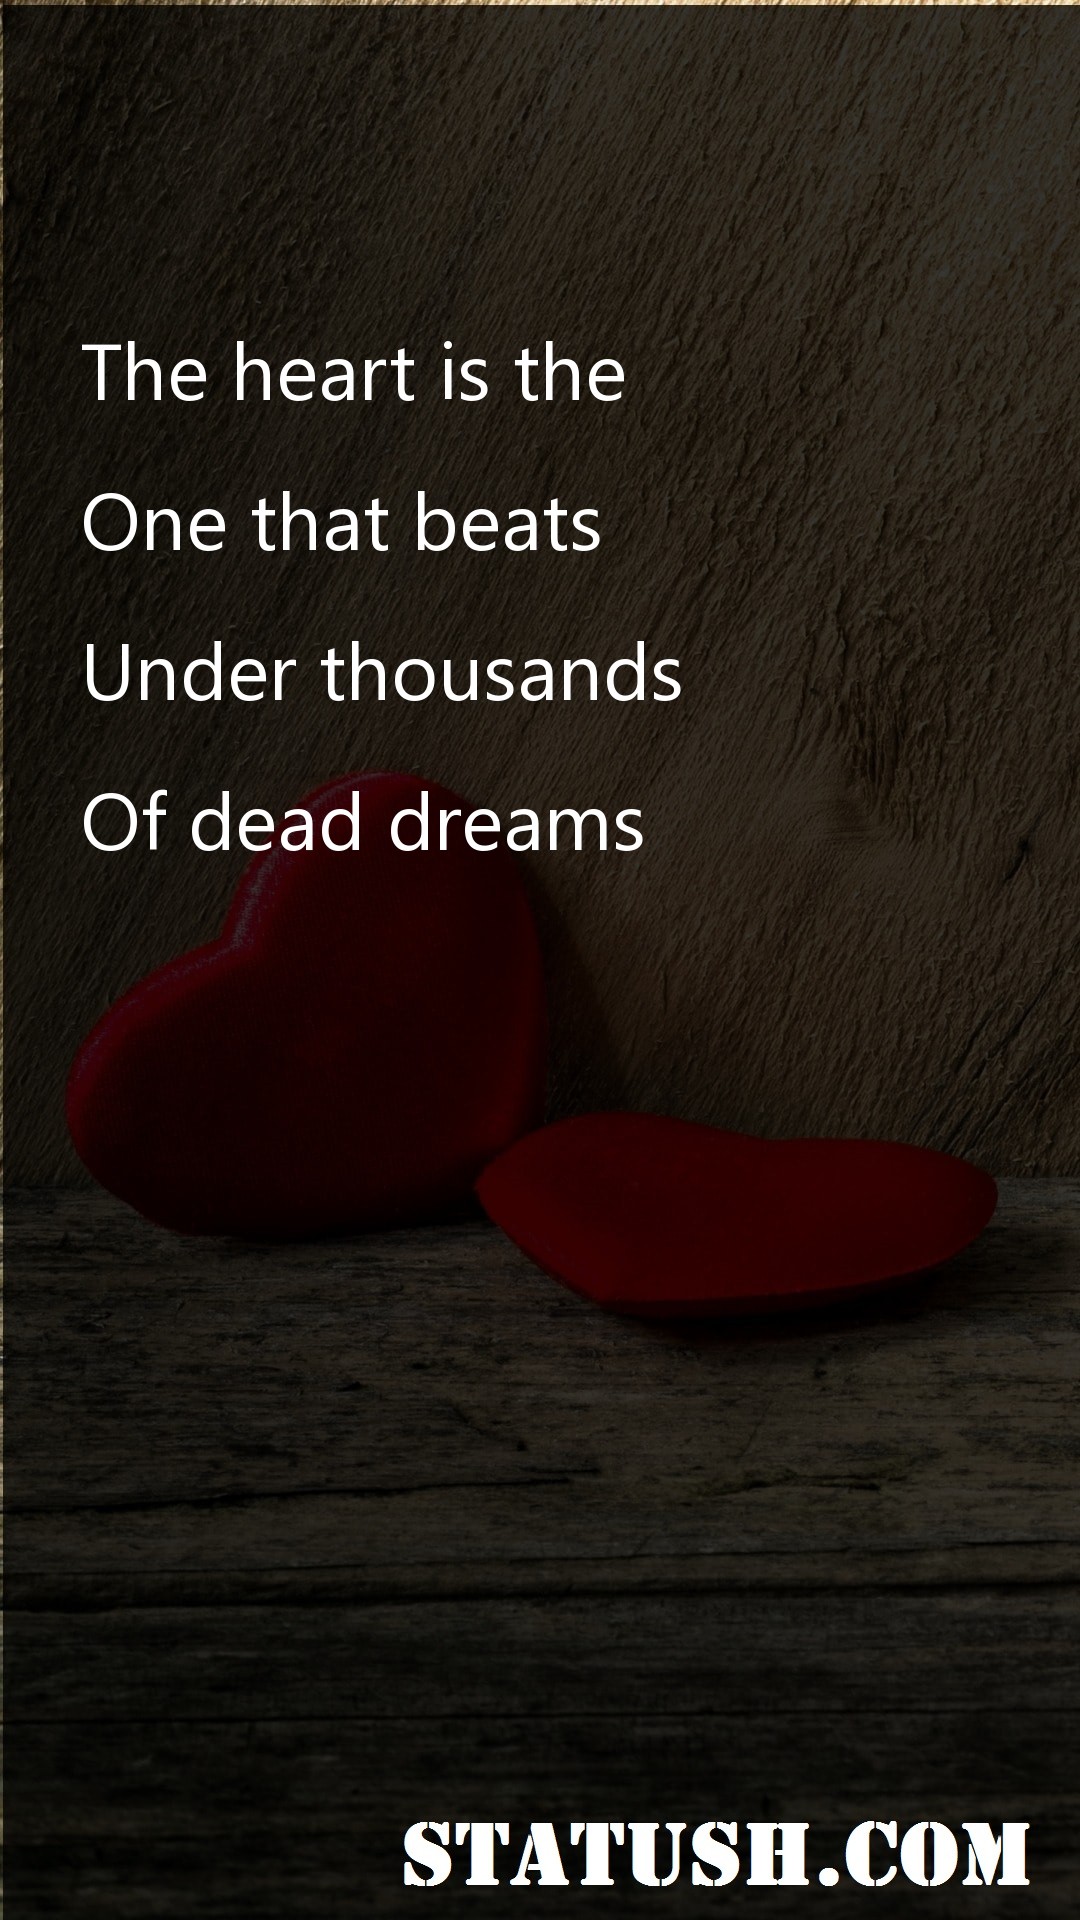 The heart is the one that beats - Love Quotes at statush.com